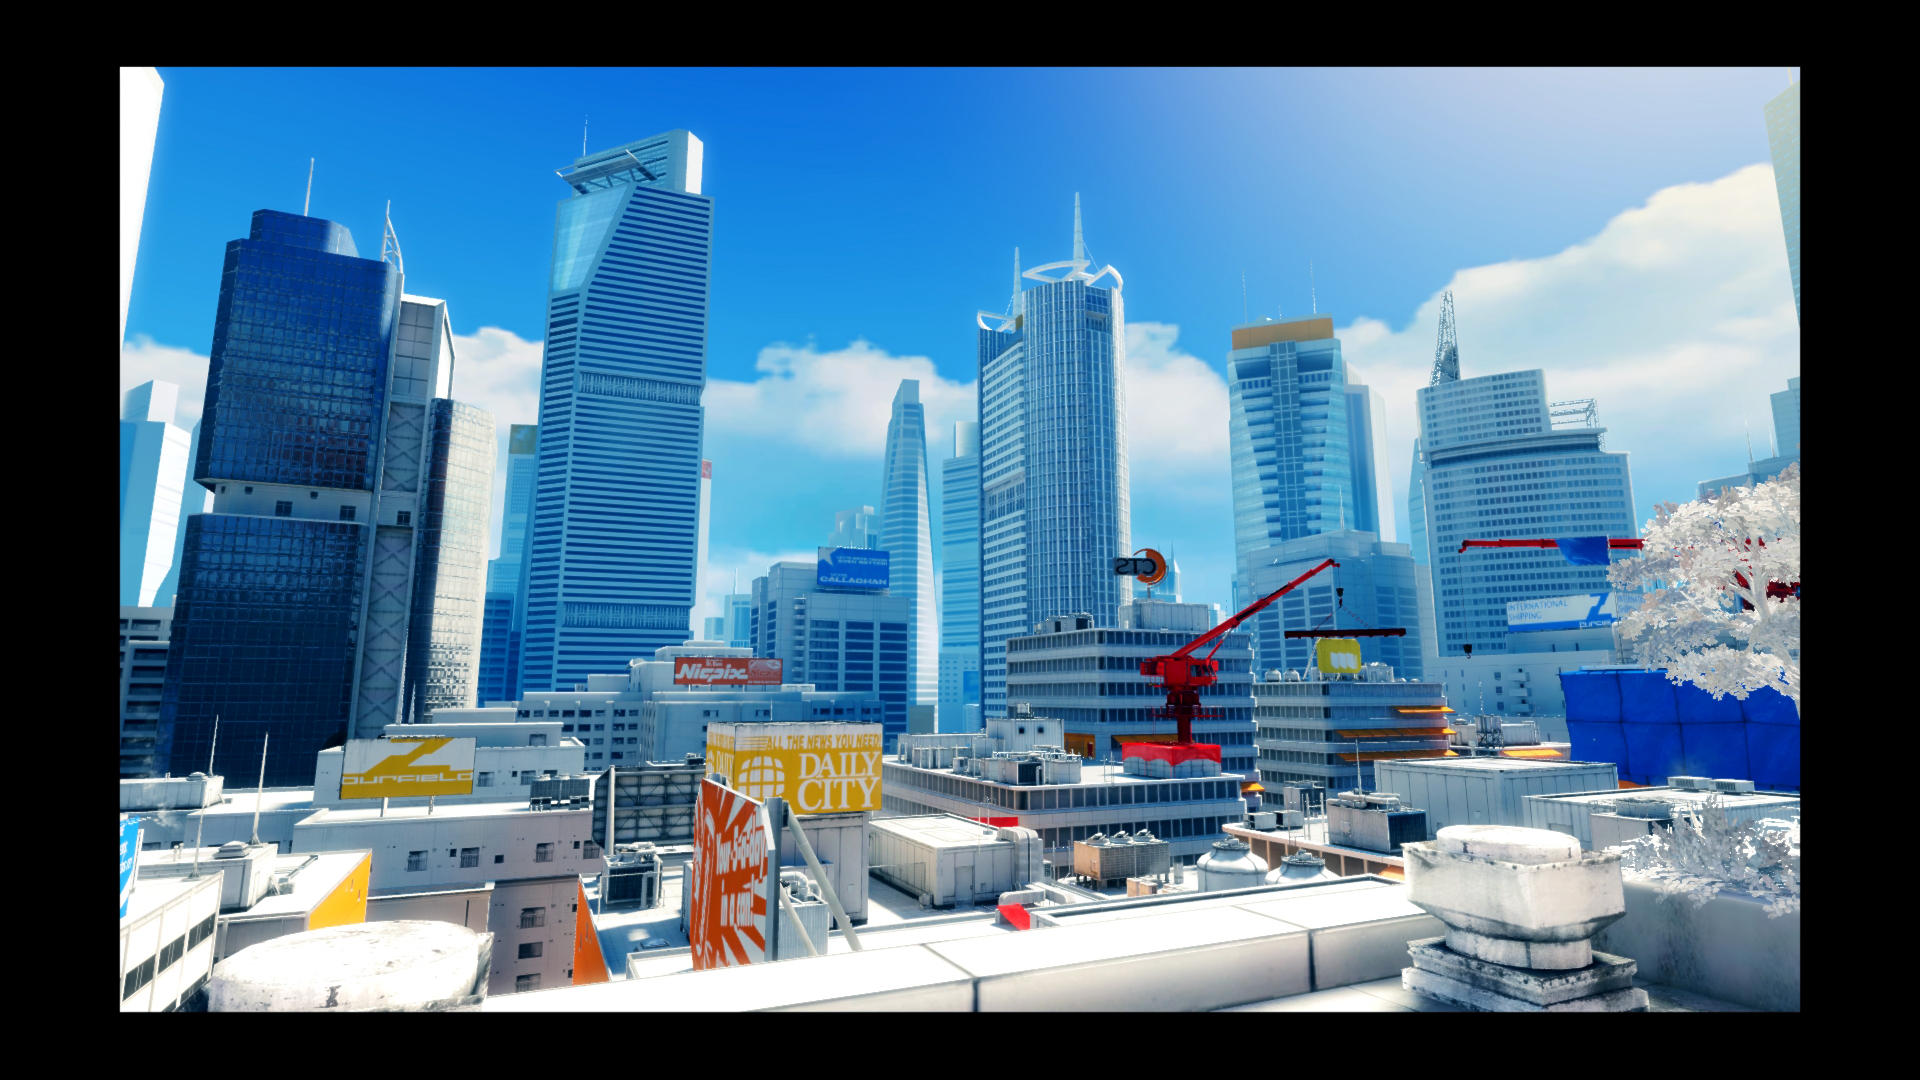 Mirrors Edge 3 Wallpaper Pack by *SxyfrG on deviantART